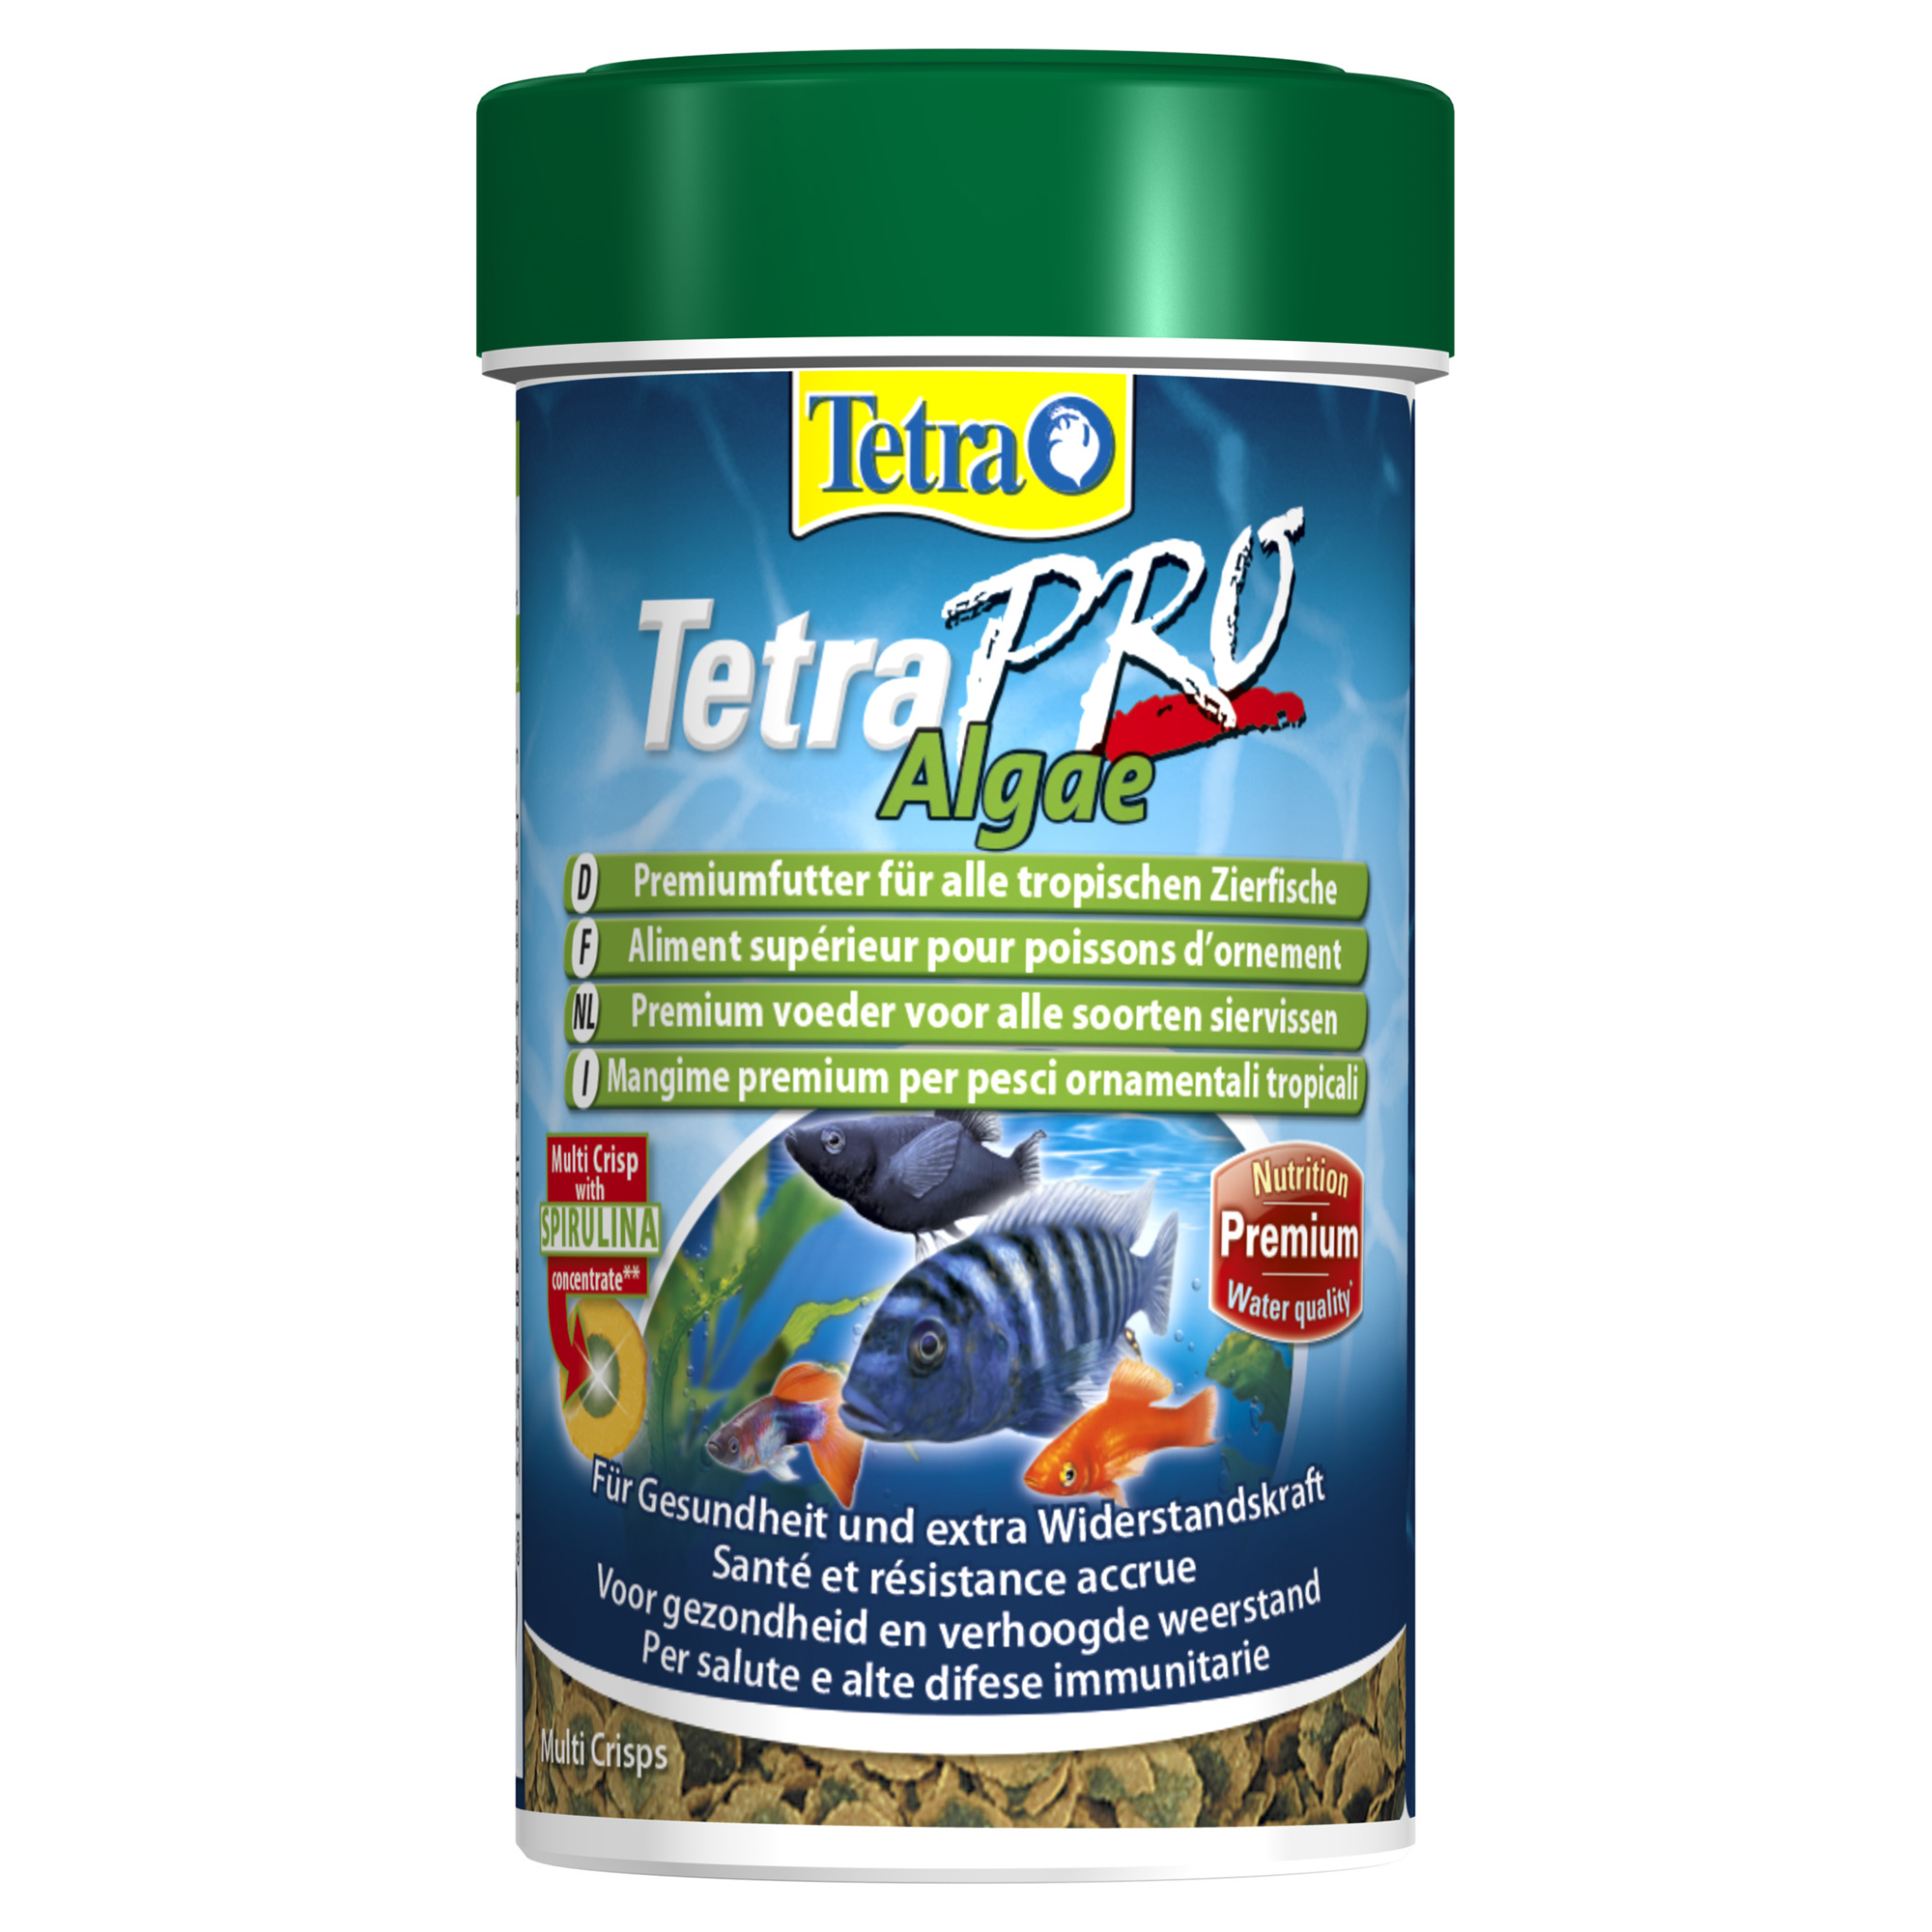 Fischfutter "Pro" Tetra Algae 18 g + product picture